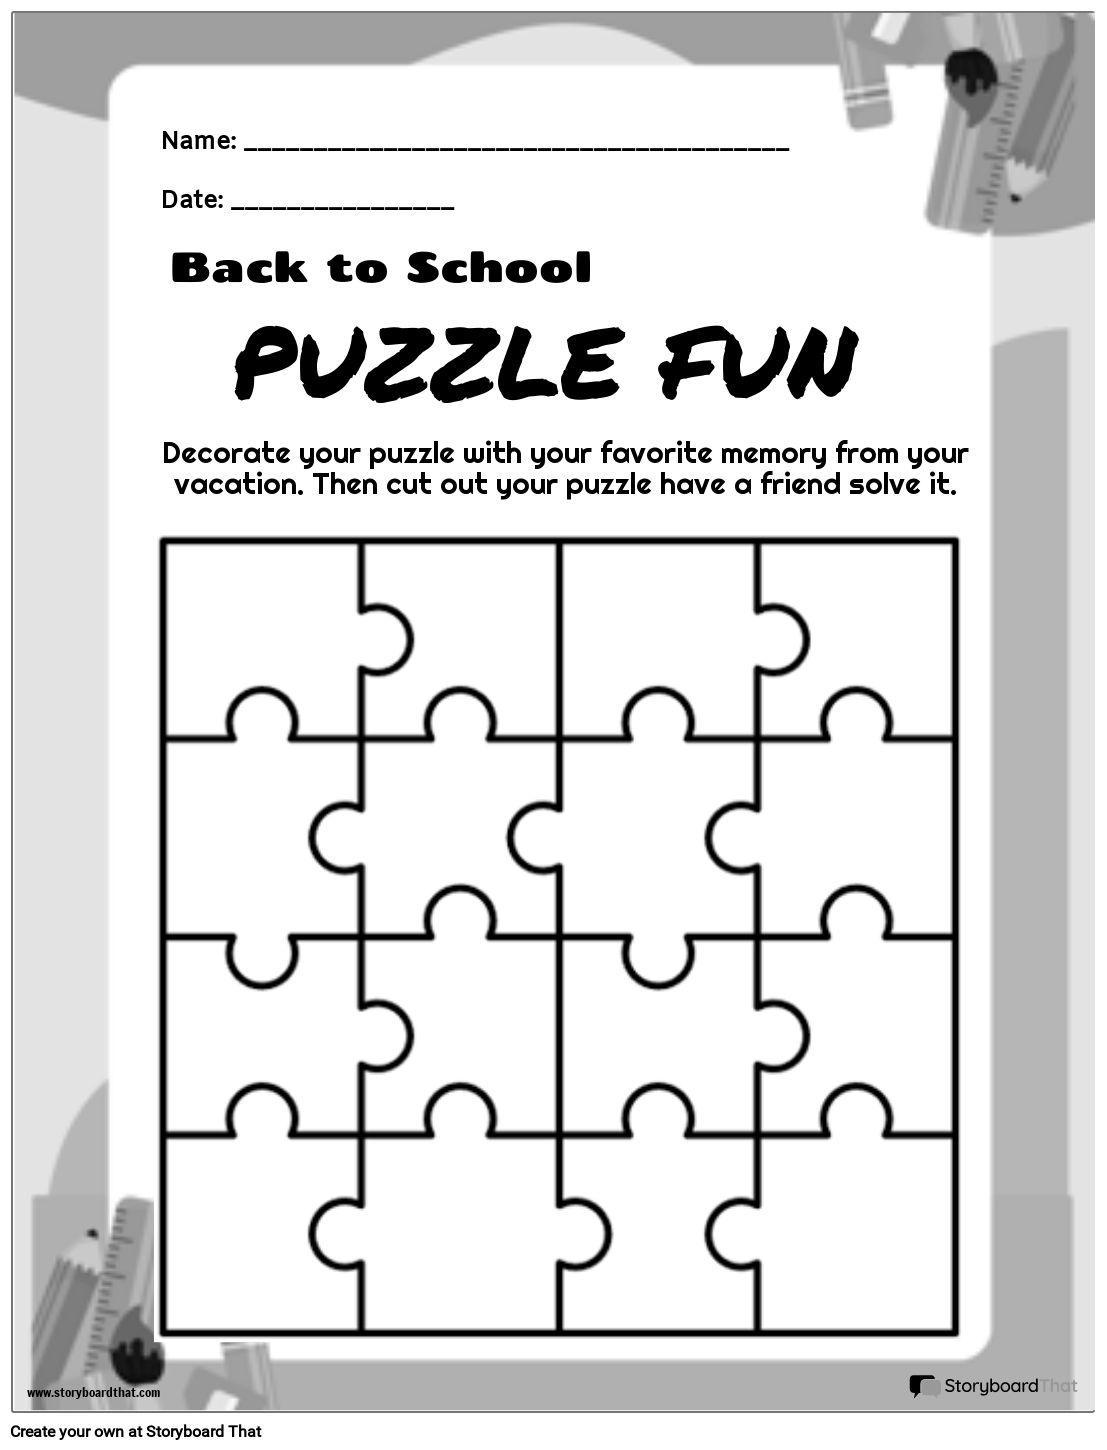 First Day of School Jigsaw Puzzle - Free and Printable